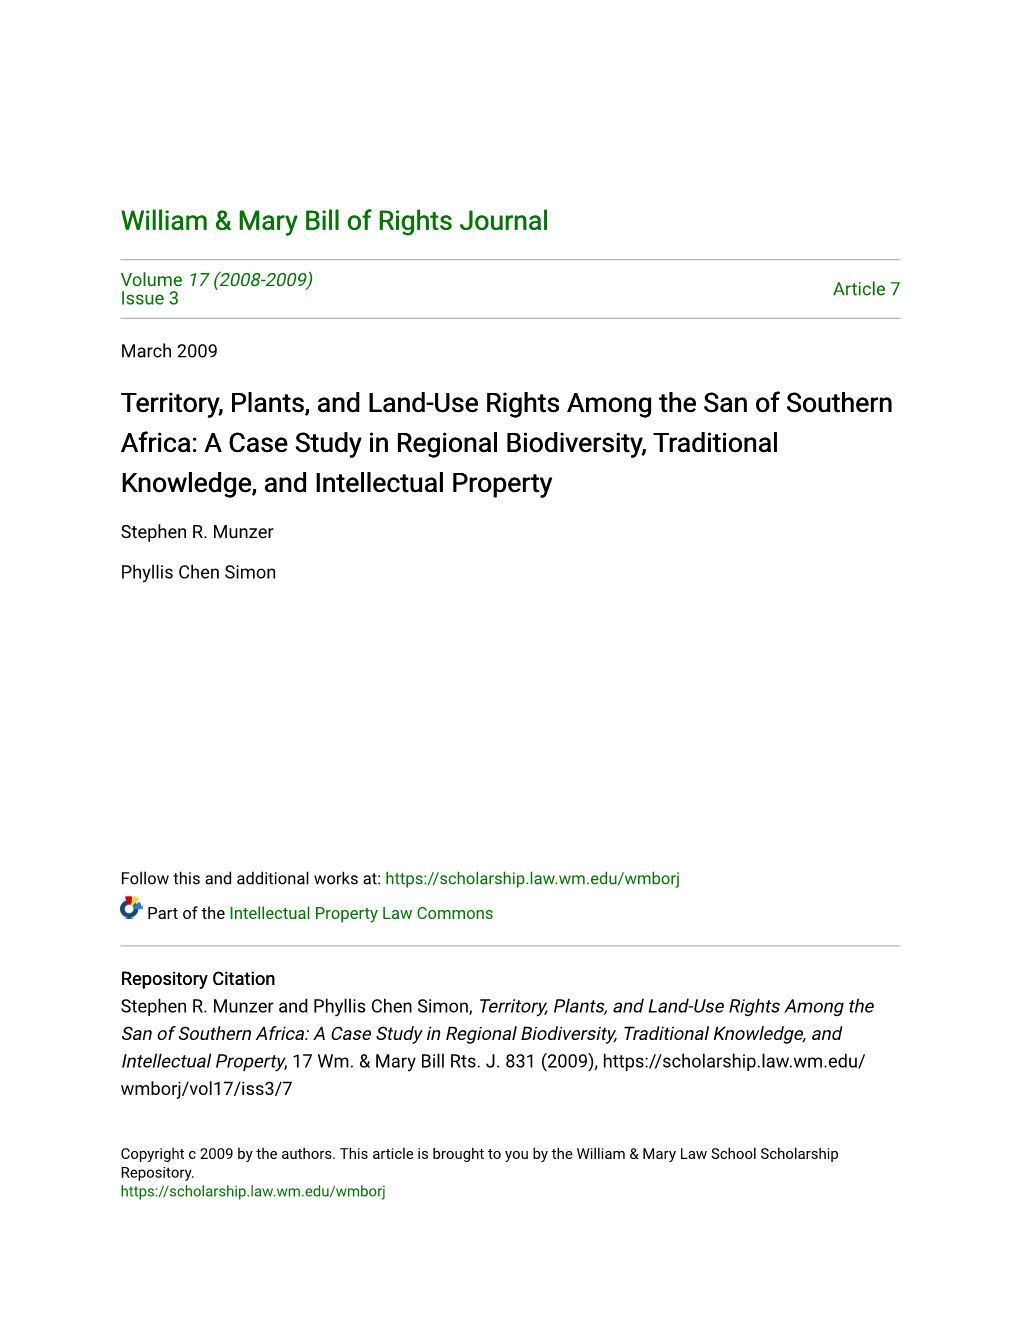 Territory, Plants, and Land-Use Rights Among the San of Southern Africa: a Case Study in Regional Biodiversity, Traditional Knowledge, and Intellectual Property